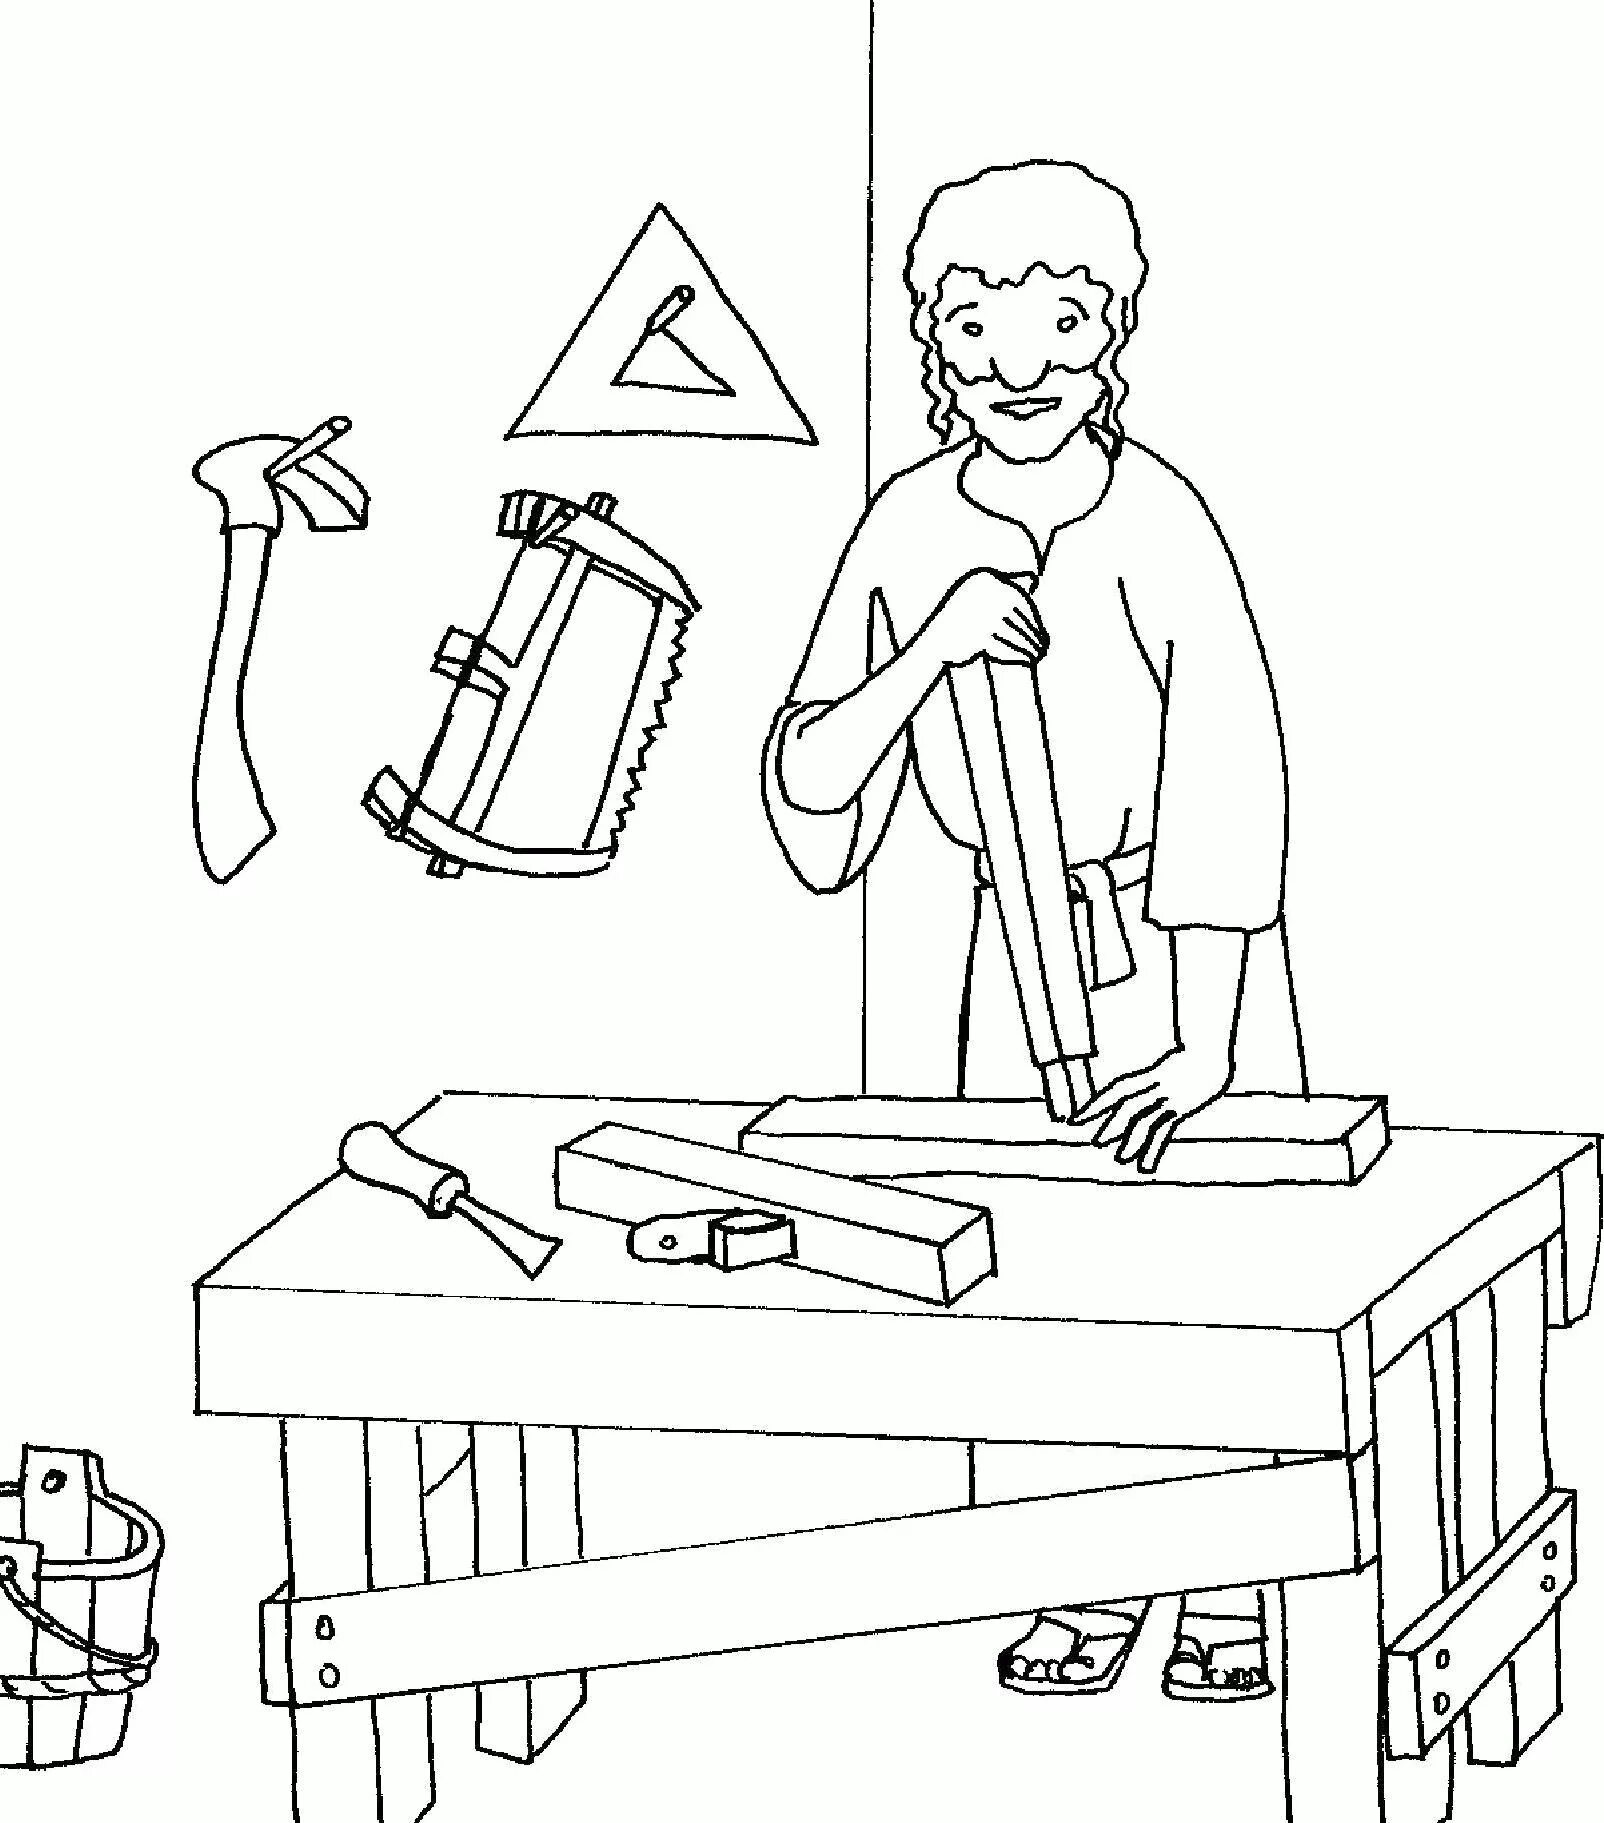 Carpenter coloring page with color illumination